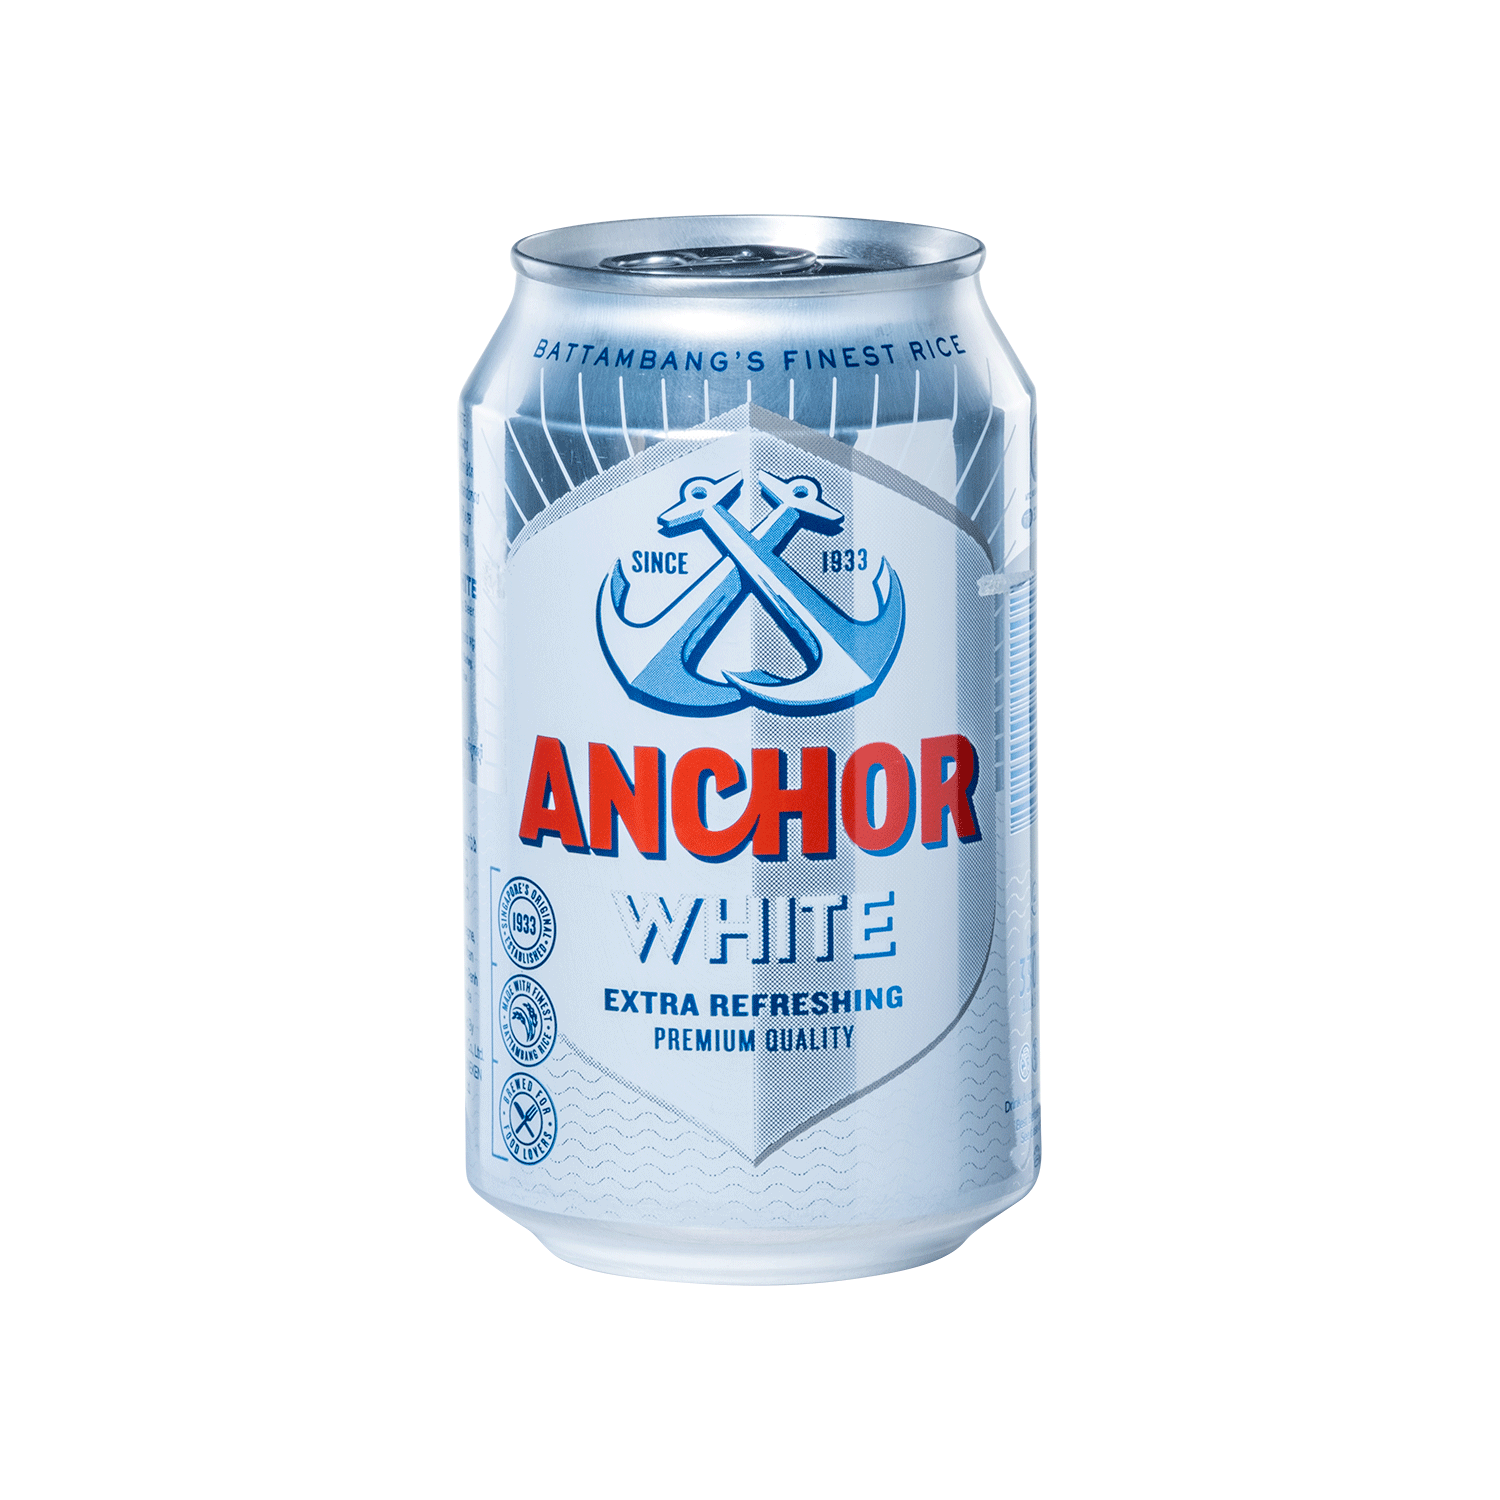 Anchor WHITE - Silver Quality Award 2022 from Monde Selection